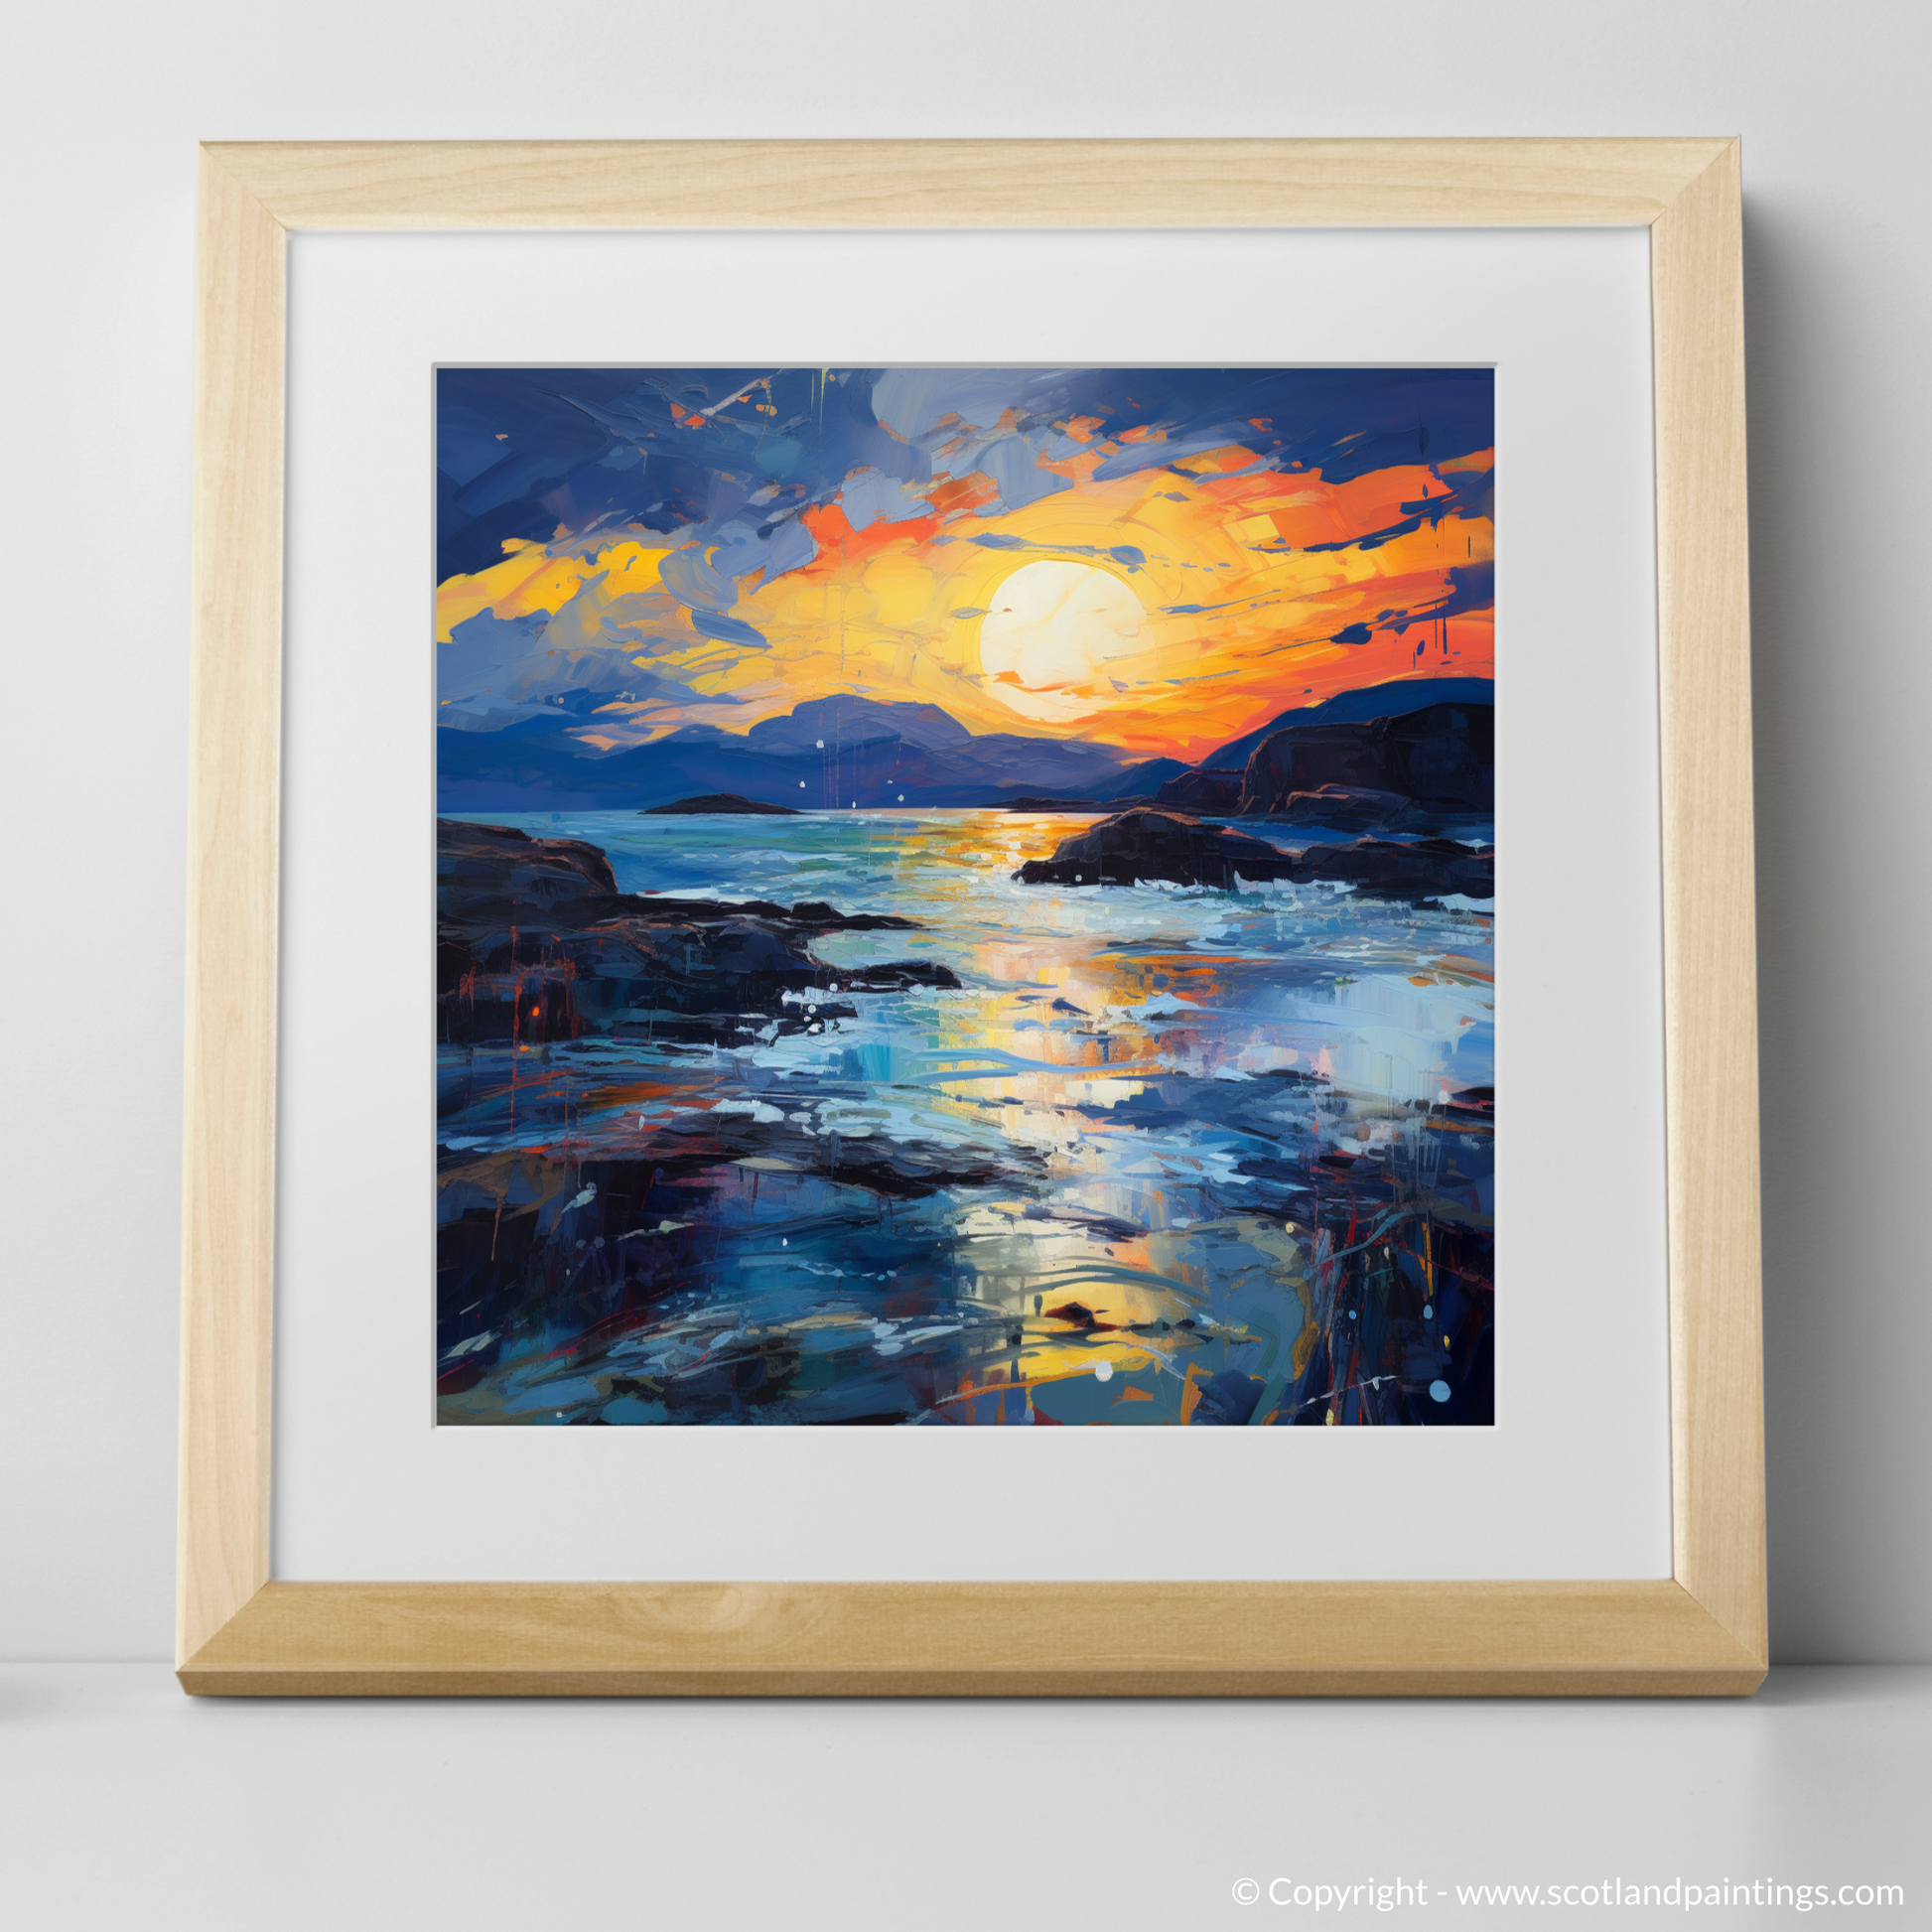 Art Print of Sound of Iona at dusk with a natural frame